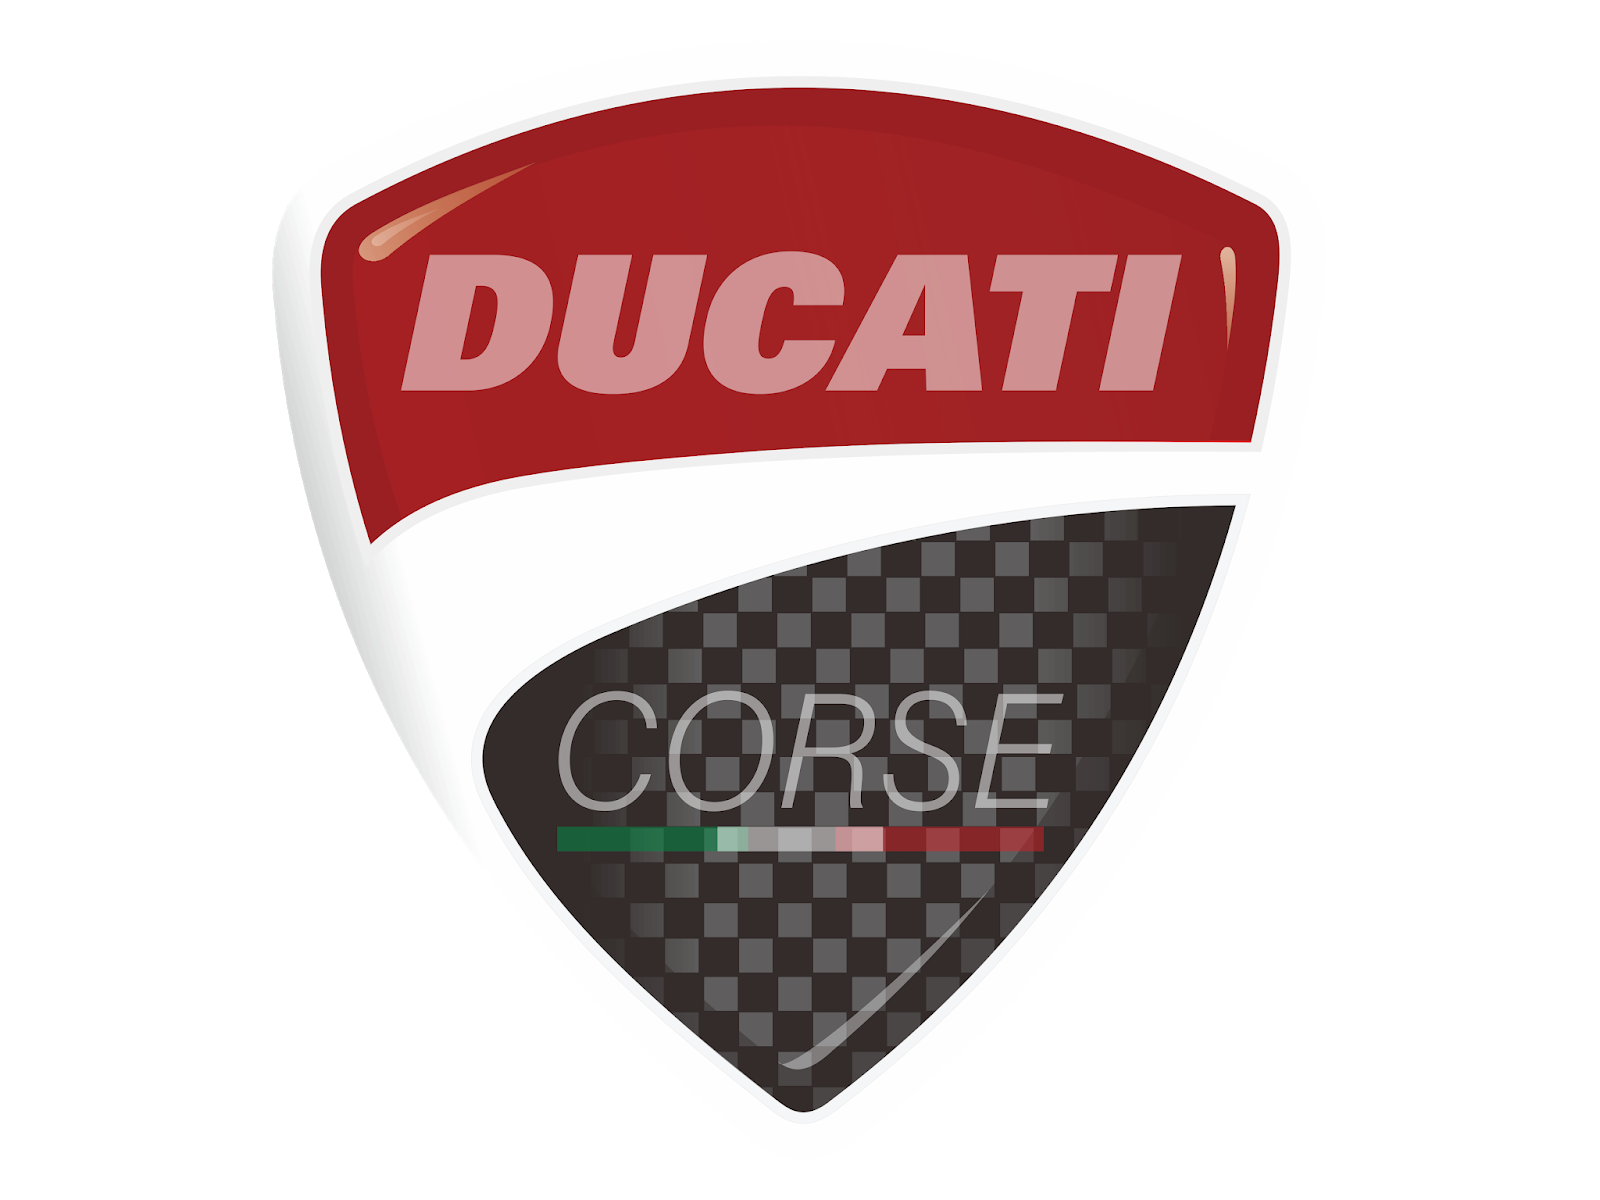 0 Result Images of Ducati Corse Logo Png - PNG Image Collection